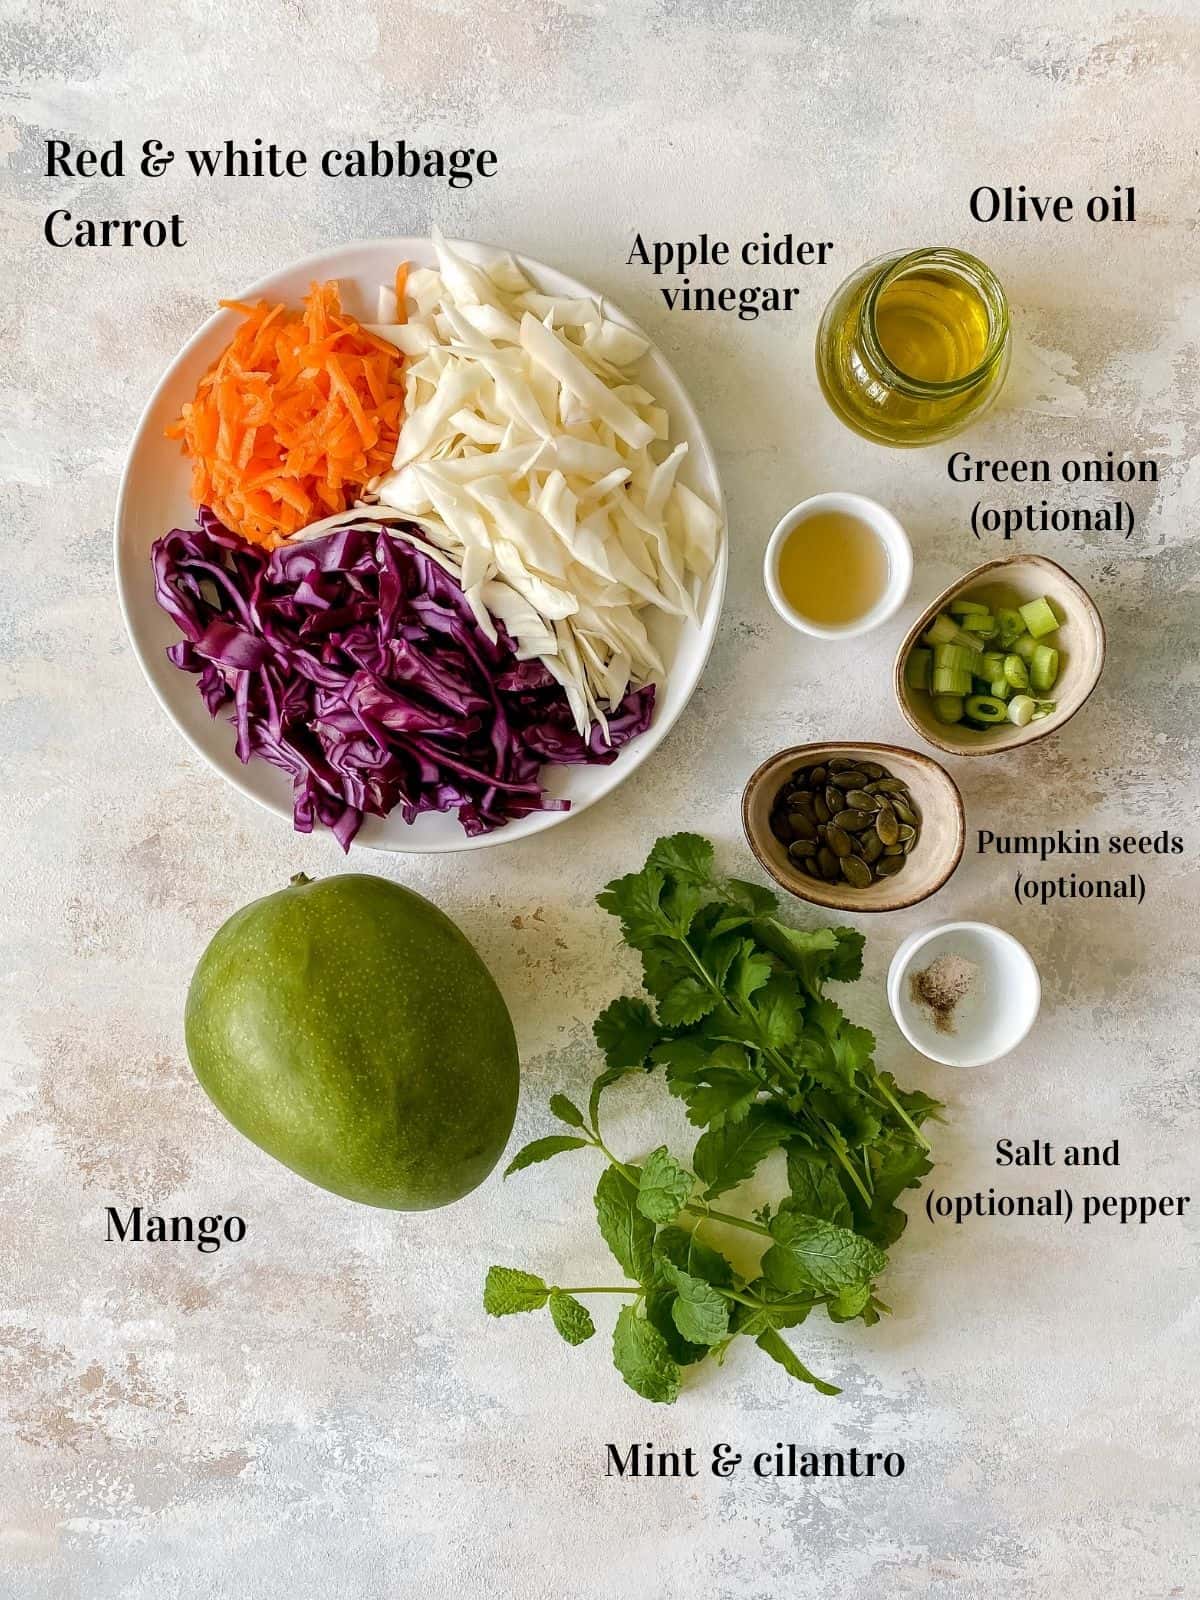 overhead view of a plate of labelled red and white cabbage and carrot, bowls of green onion, pumpkin seeds, olive oil, apple cider vinegar, and a mango and herbs.